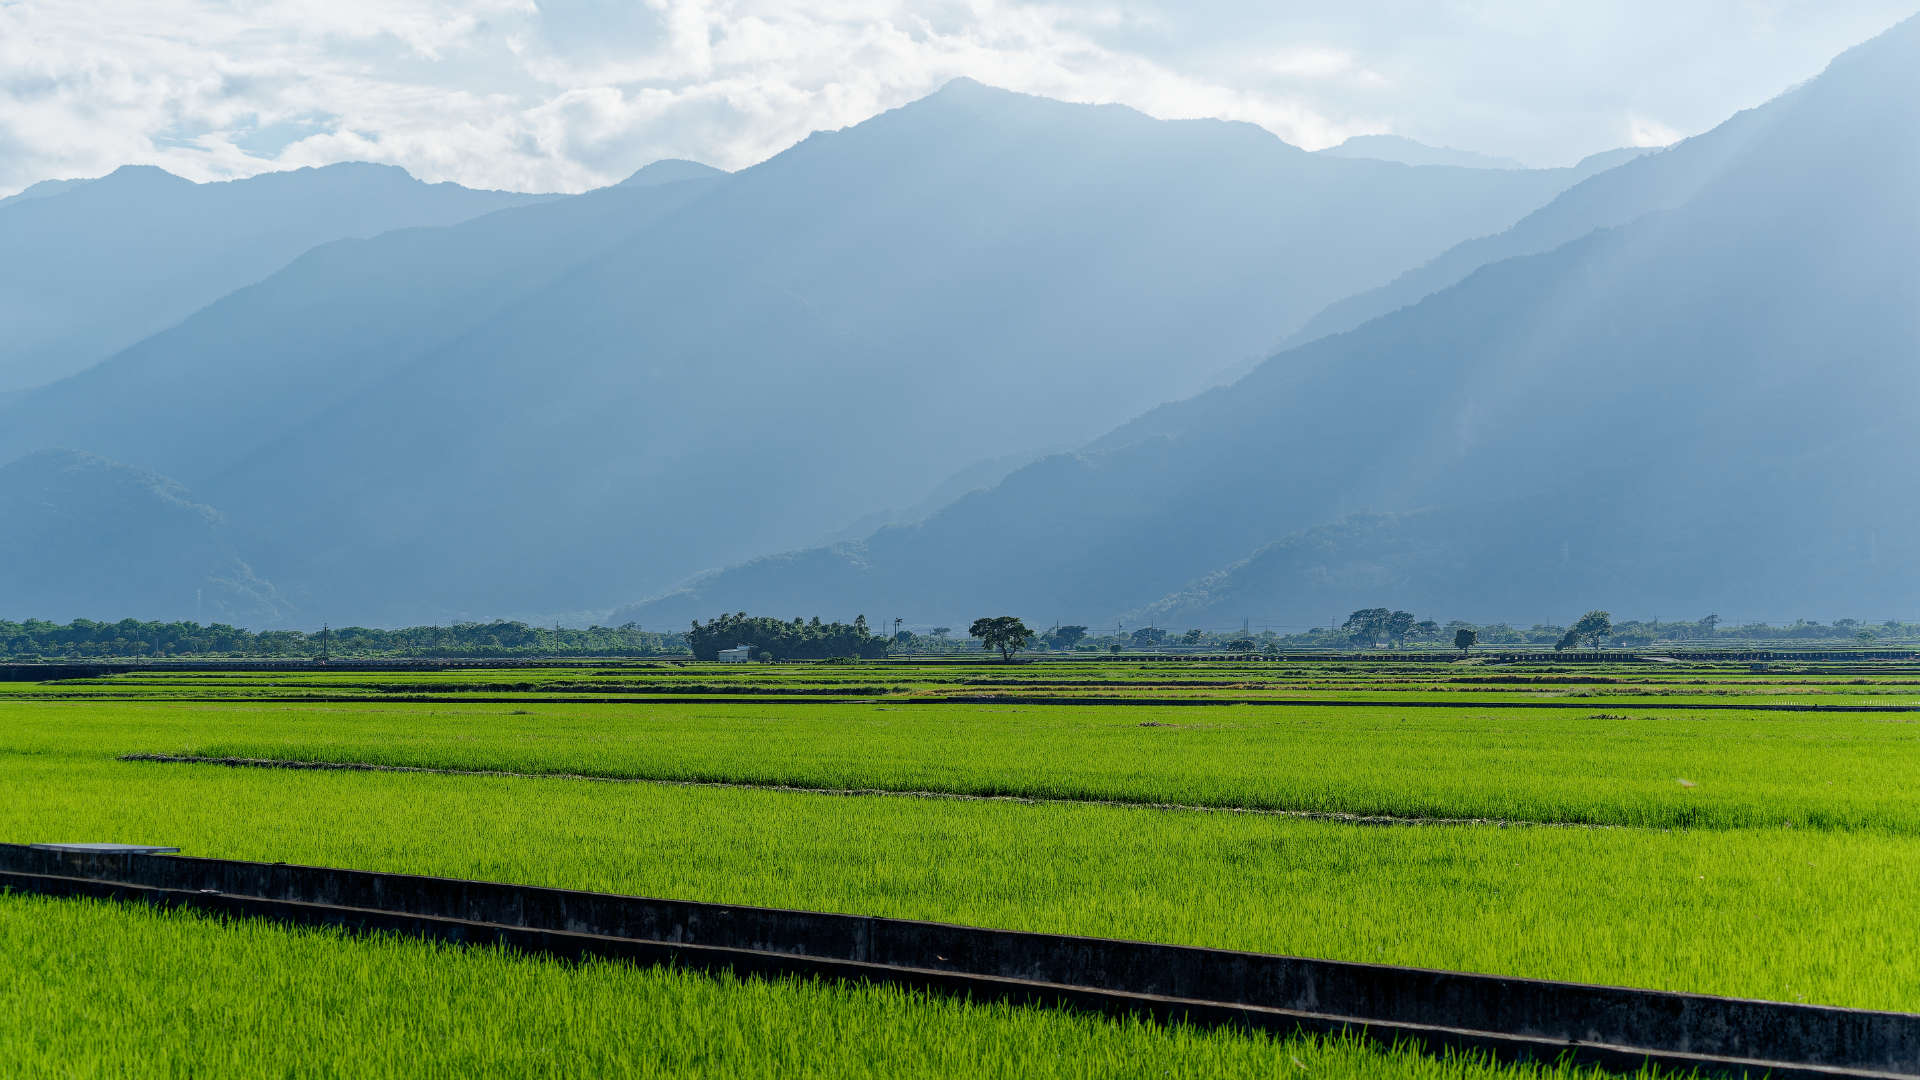 A concrete water channel bisects two vibrant rice fields, with misty mountains in the distance.